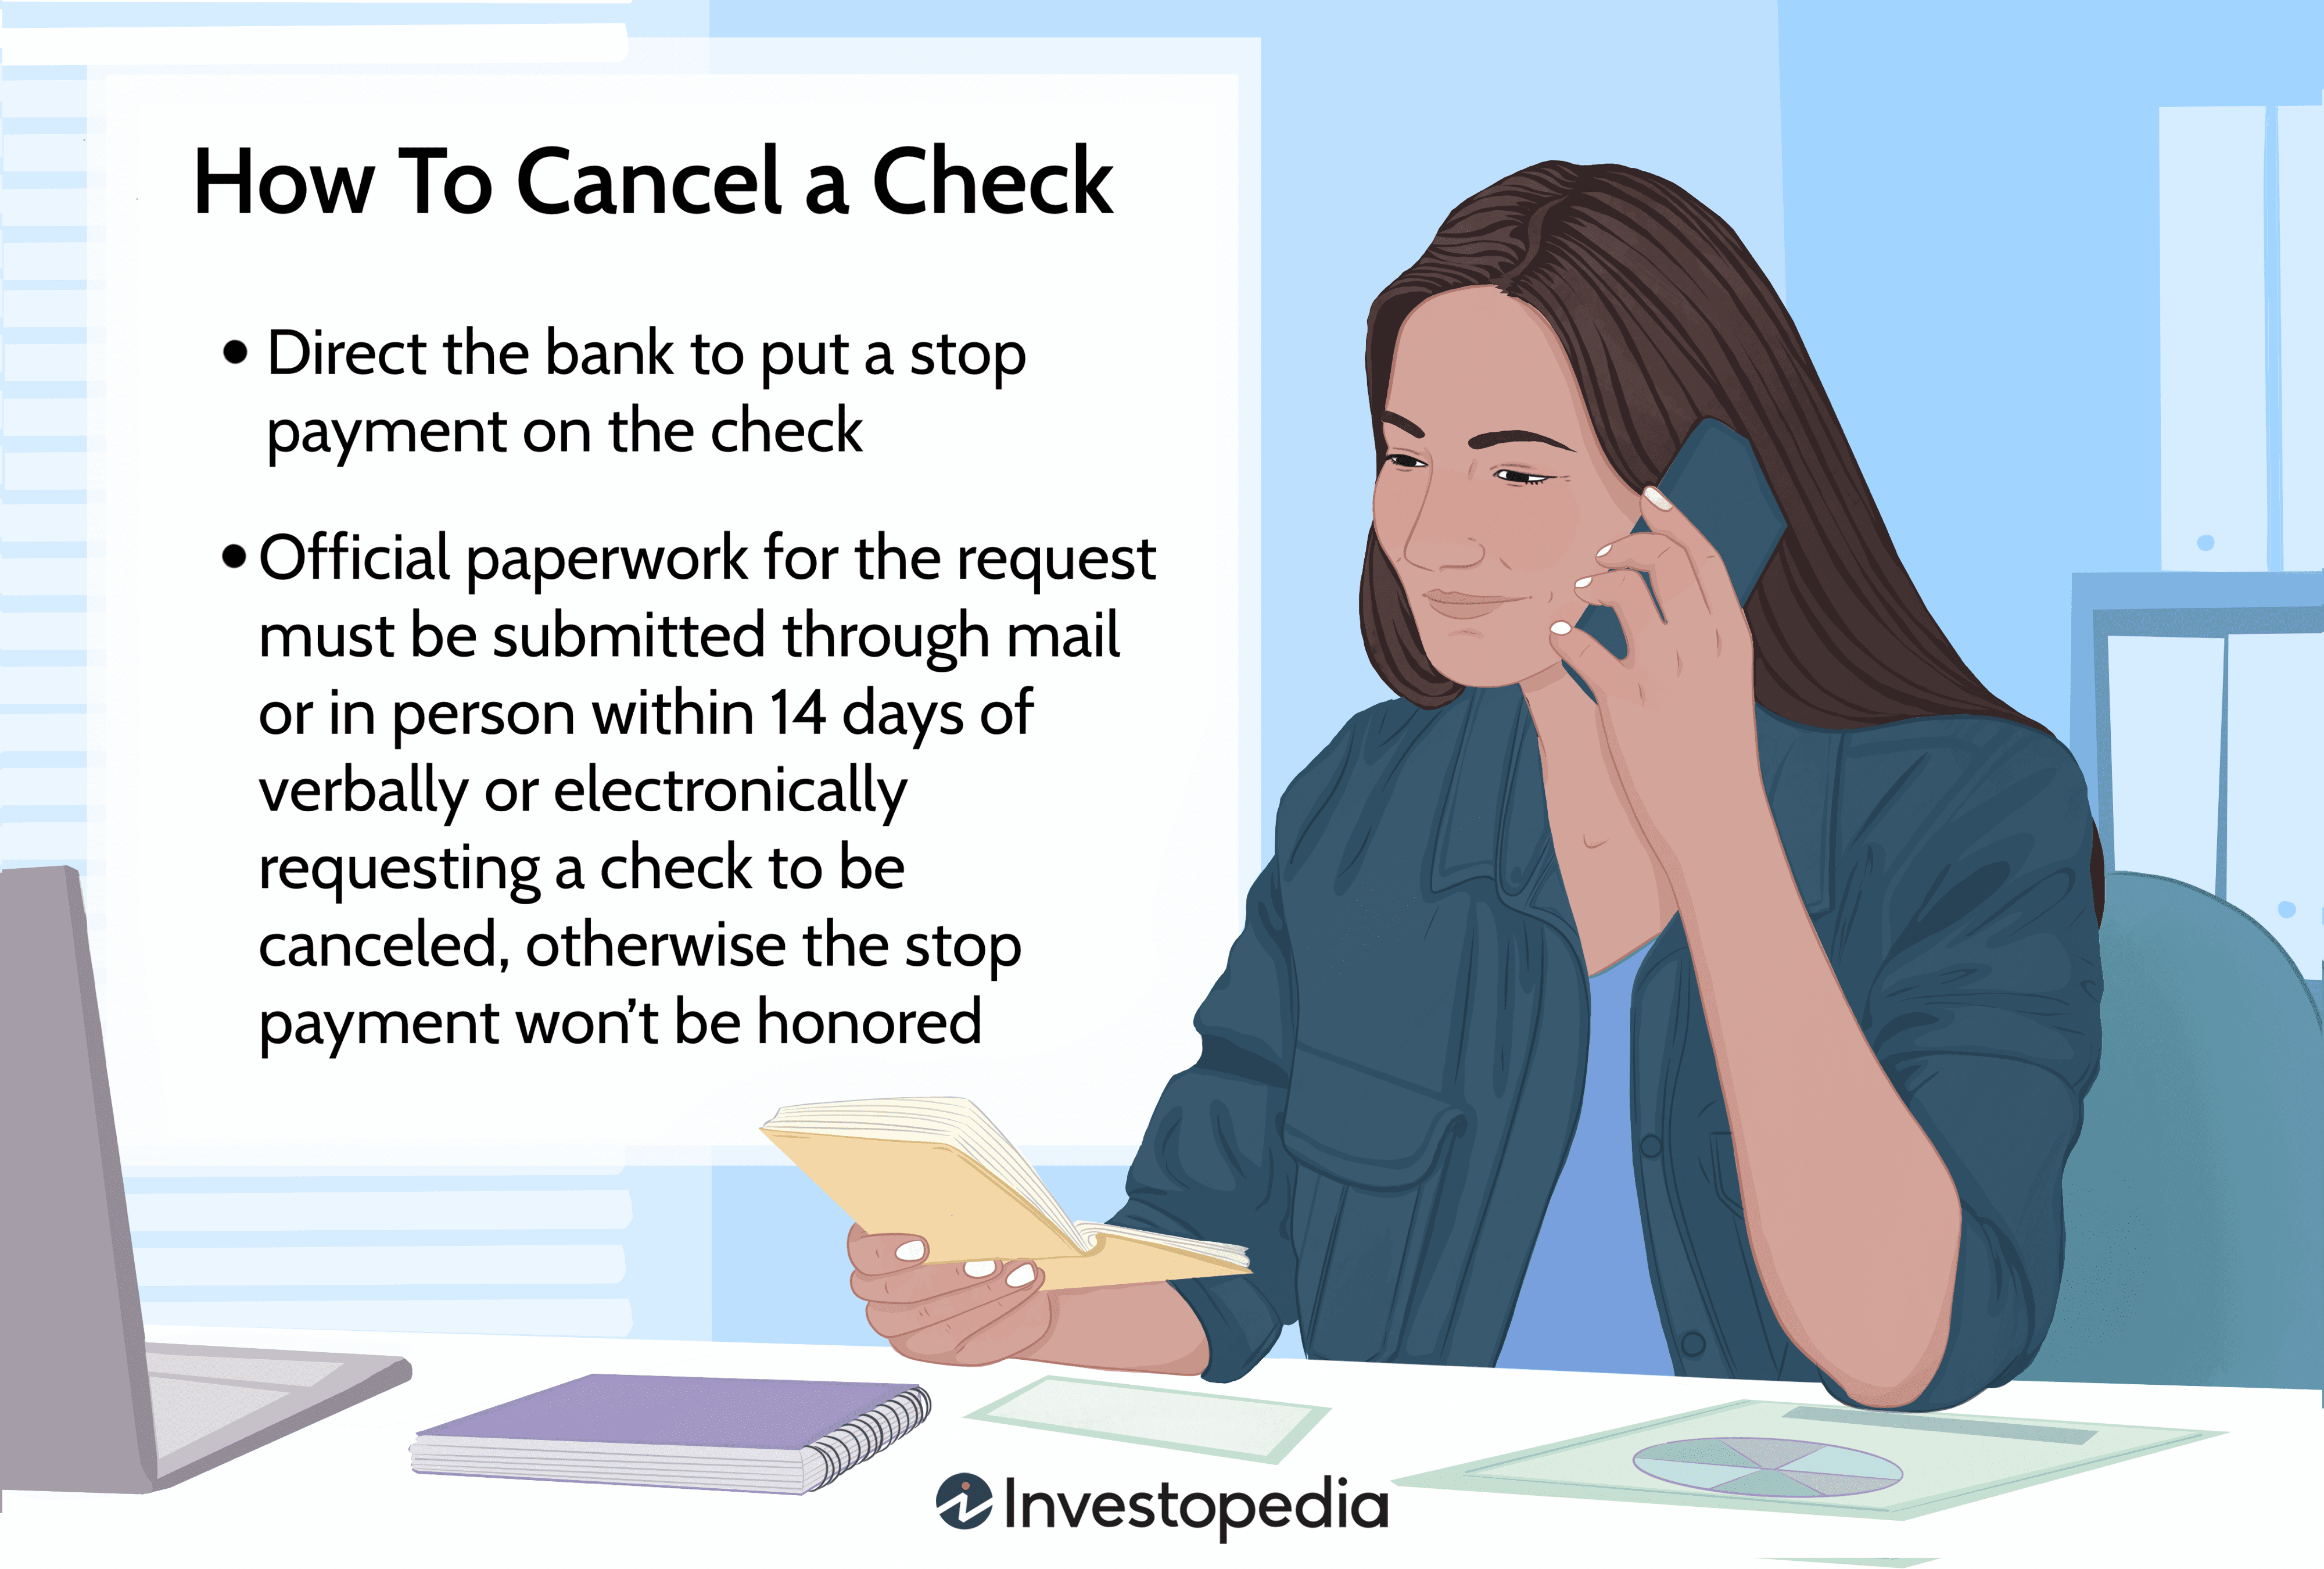 How To Cancel a Check